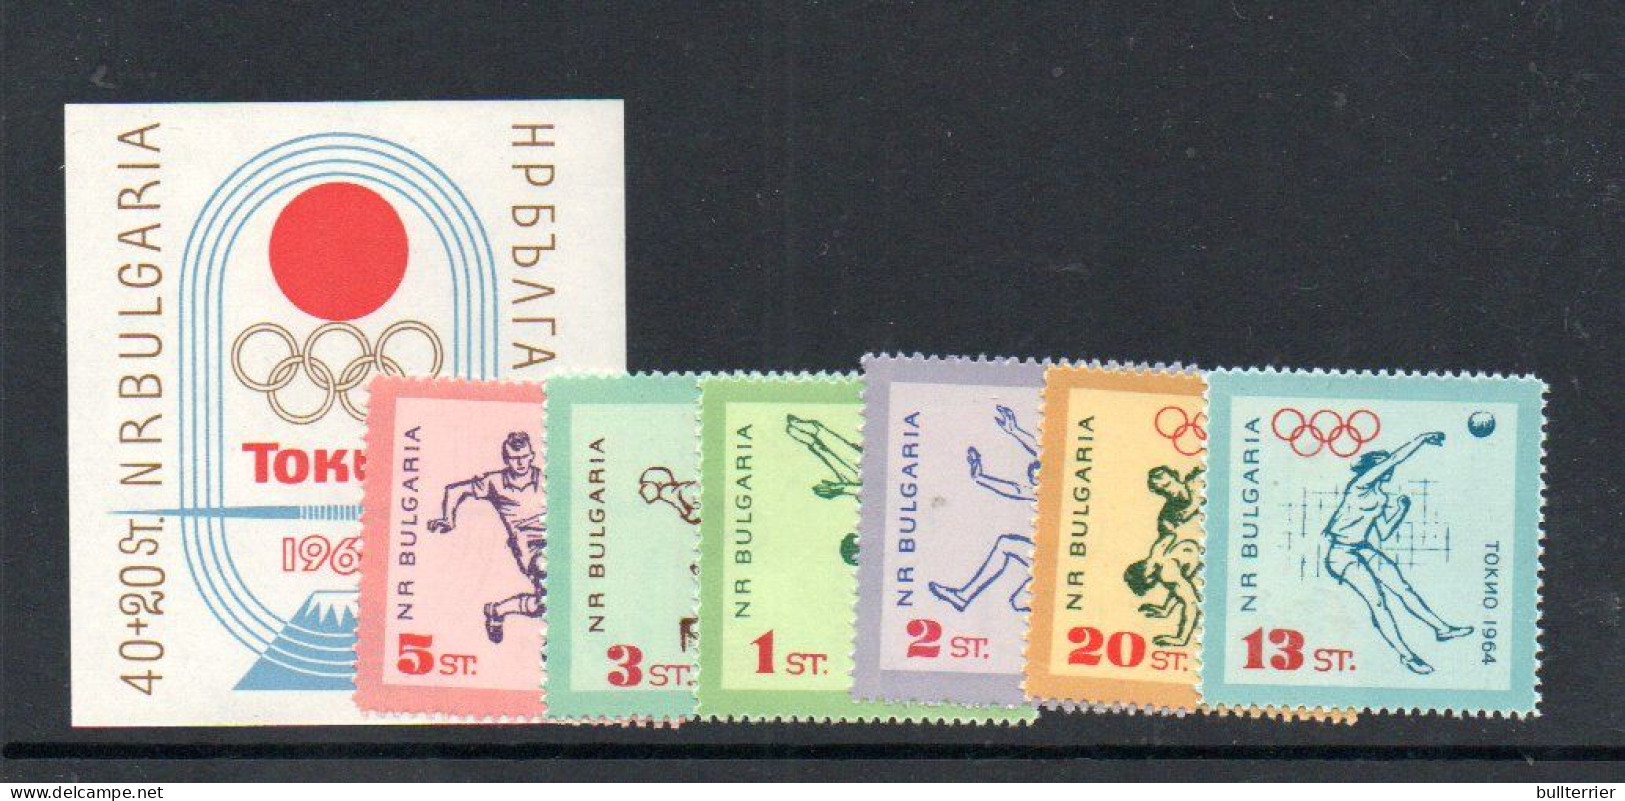 BULGARIA - 1964 - TOKYO OLYMPICS SET OF 6 + S/SHEET  MINT NEVER HINGED  SG CAT £11.70 - Unused Stamps